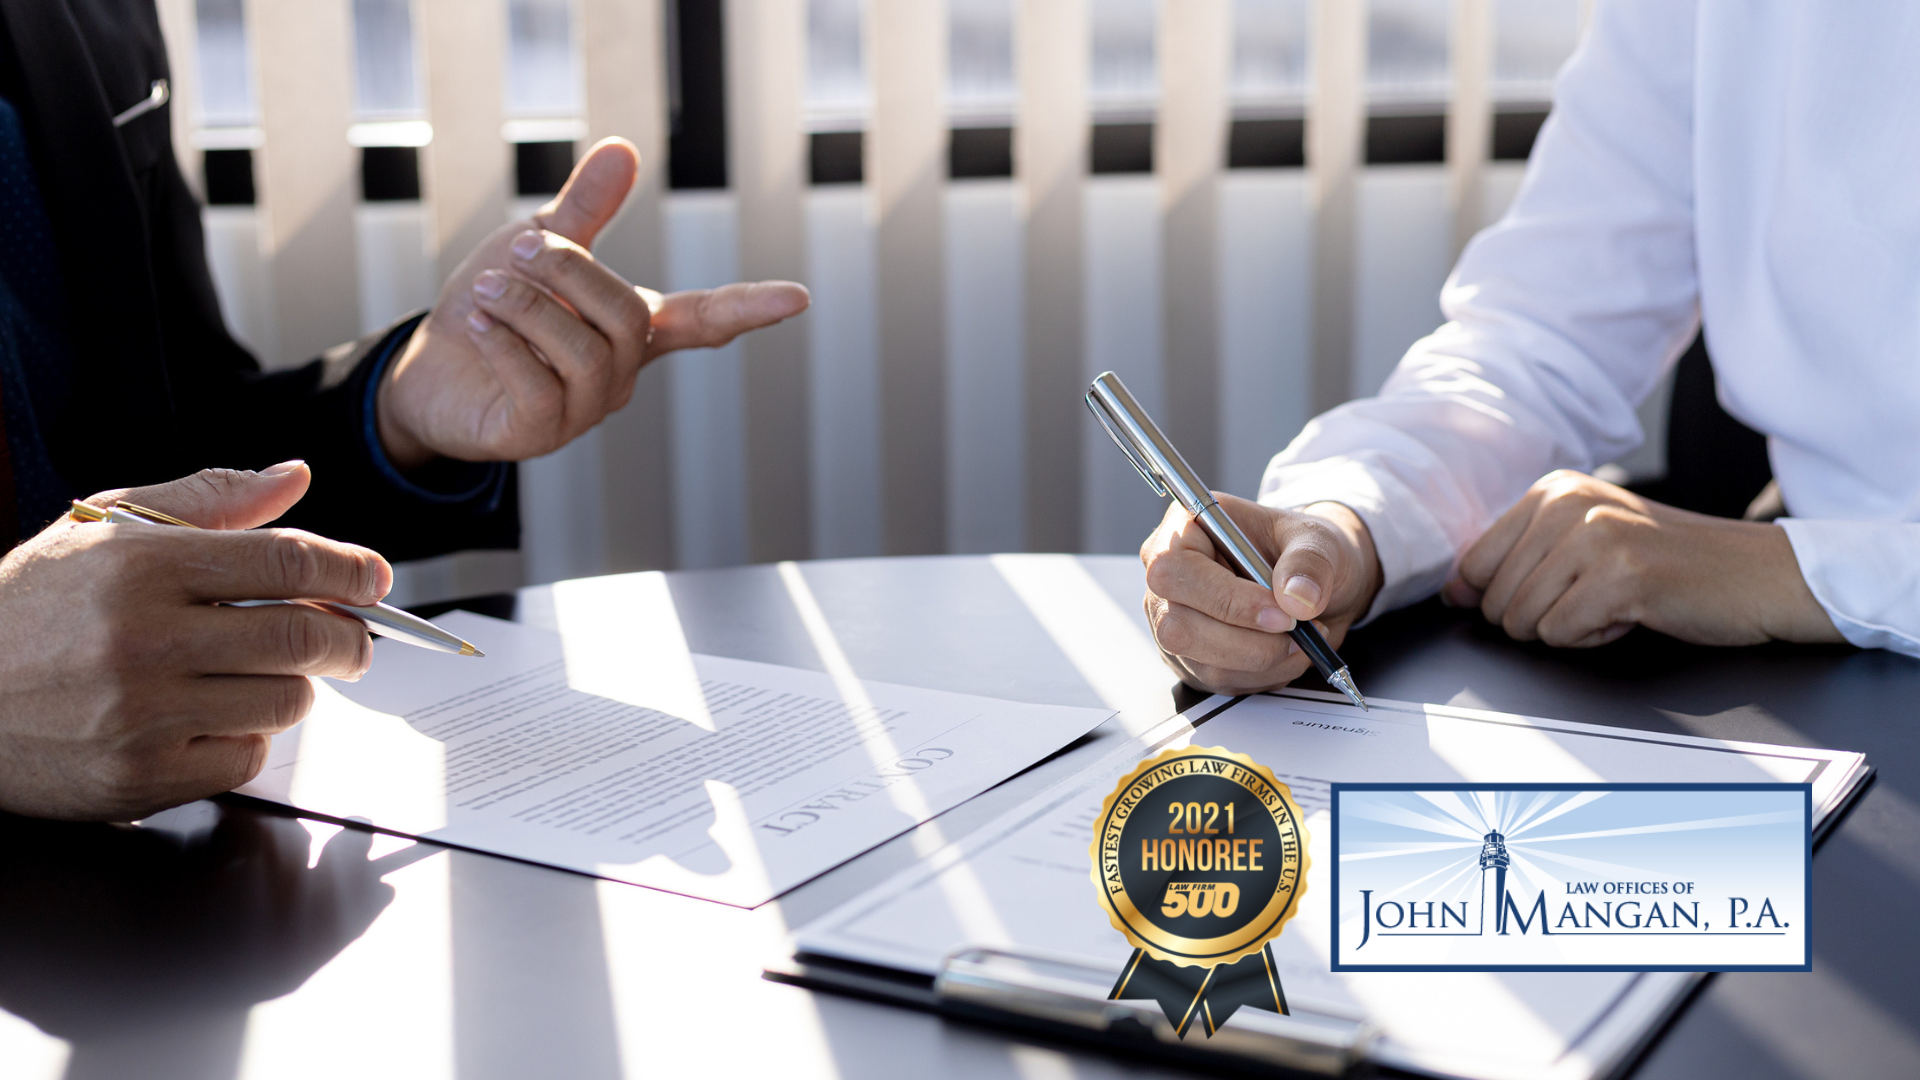 Successful Florida estate plan documents drafted by an attorney who is Certified in Trusts, Wills, and Estates by the Florida Bar is your assurance that the most important people in your life and your business will be the beneficiaries of your estate.